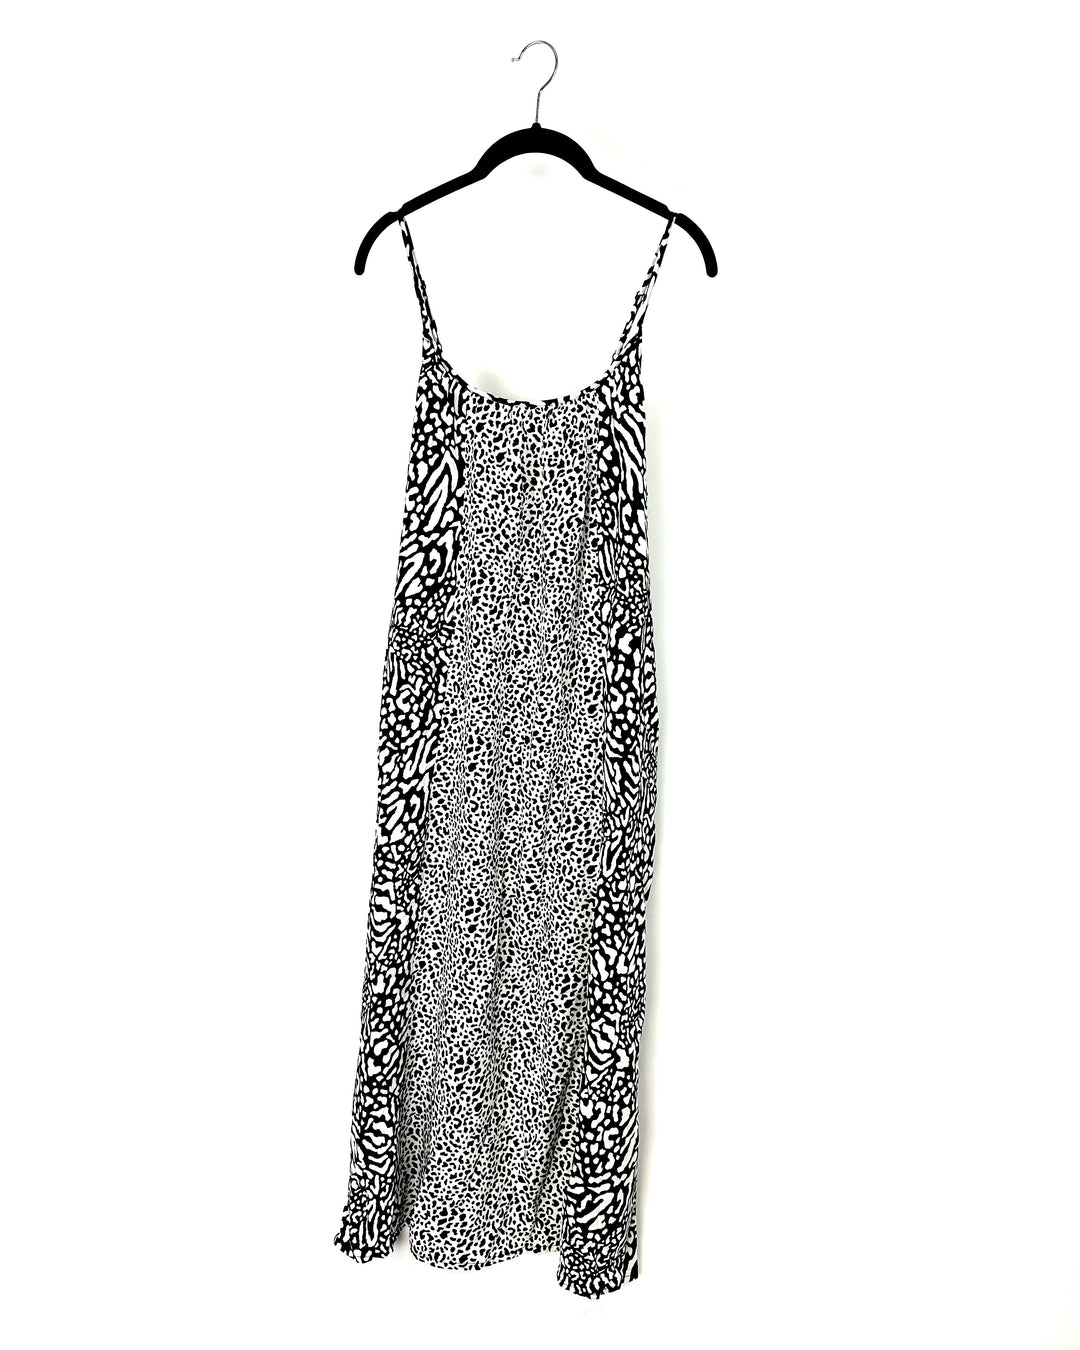 Black And White Animal Print Nightgown - Small